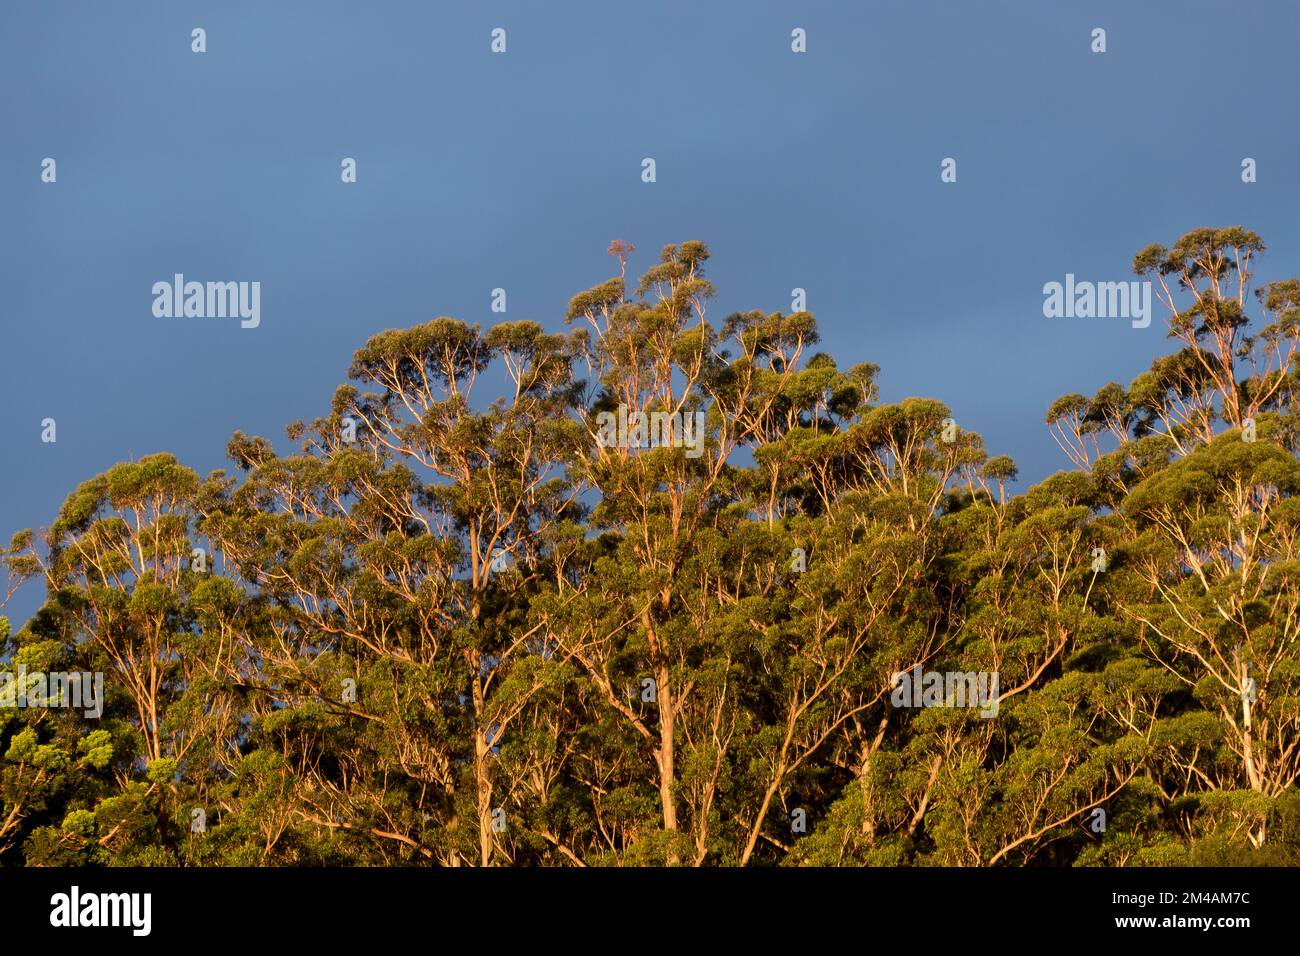 Green tree-tops of Flooded Gum trees, Eucalyptus grandis, lit by setting sun under a dark blue sky. Rainforest in Queensland, Australia. Copy space. Stock Photo